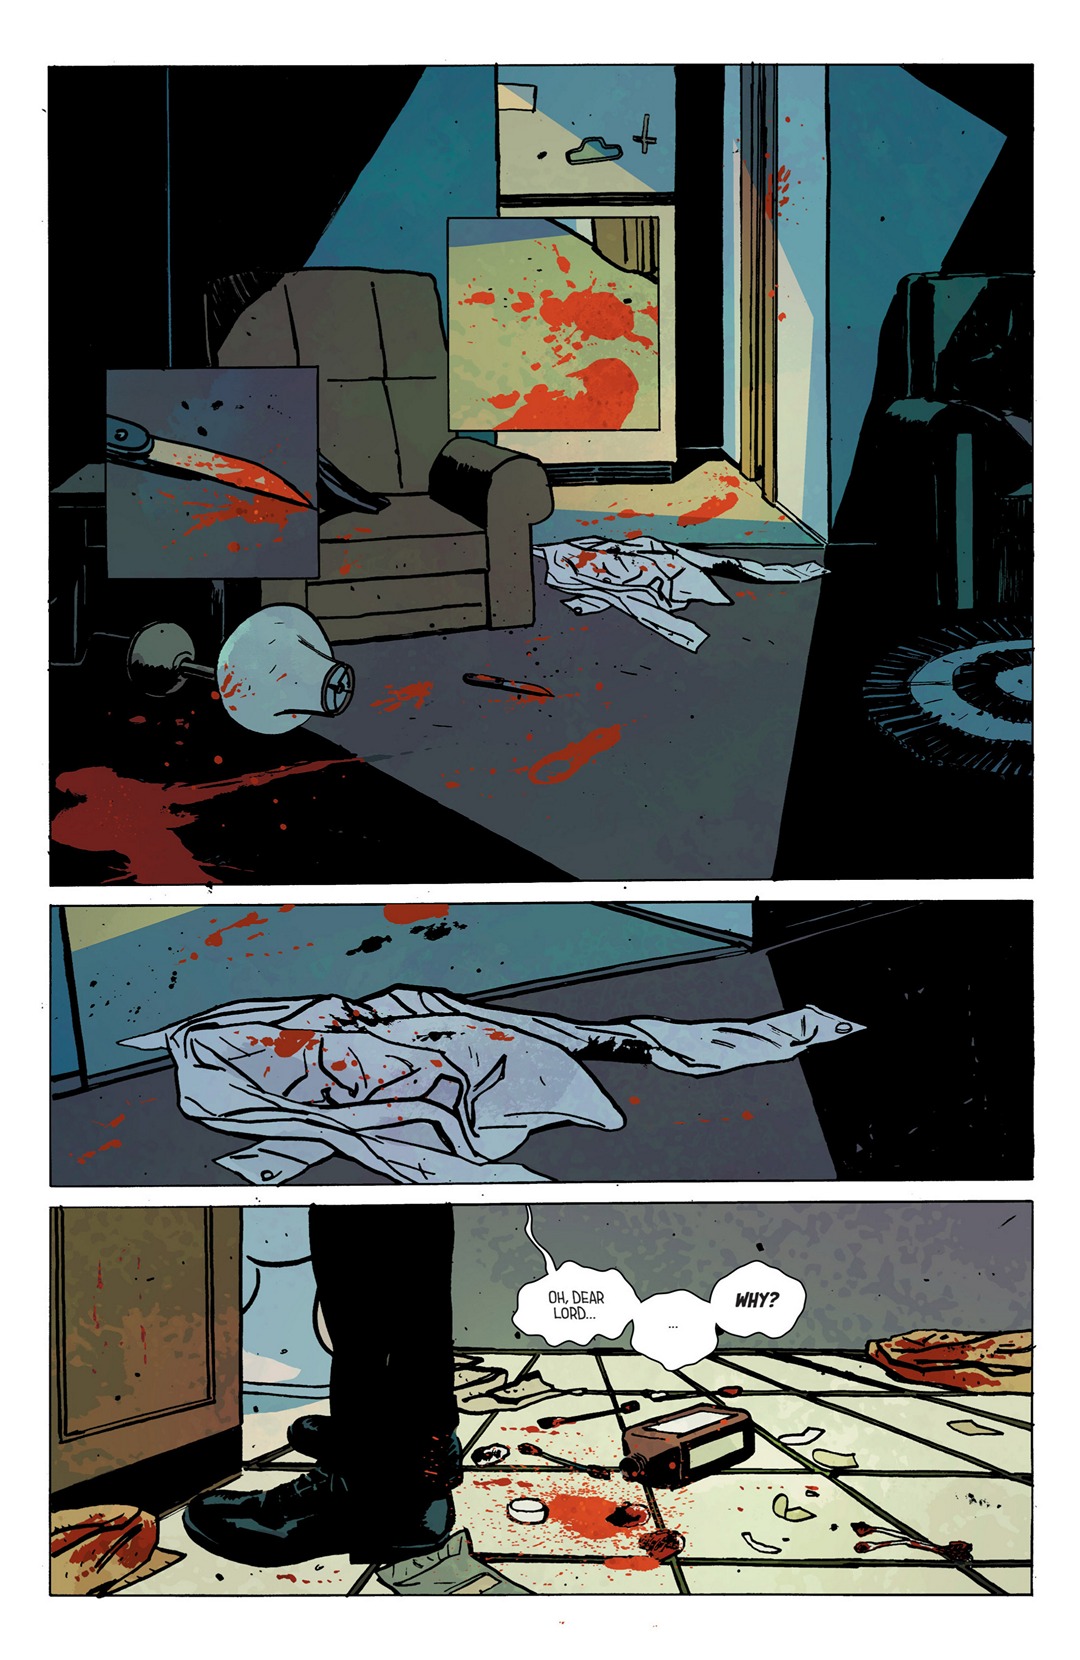 Outcast by Kirkman & Azaceta (2014-): Chapter 7 - Page 3